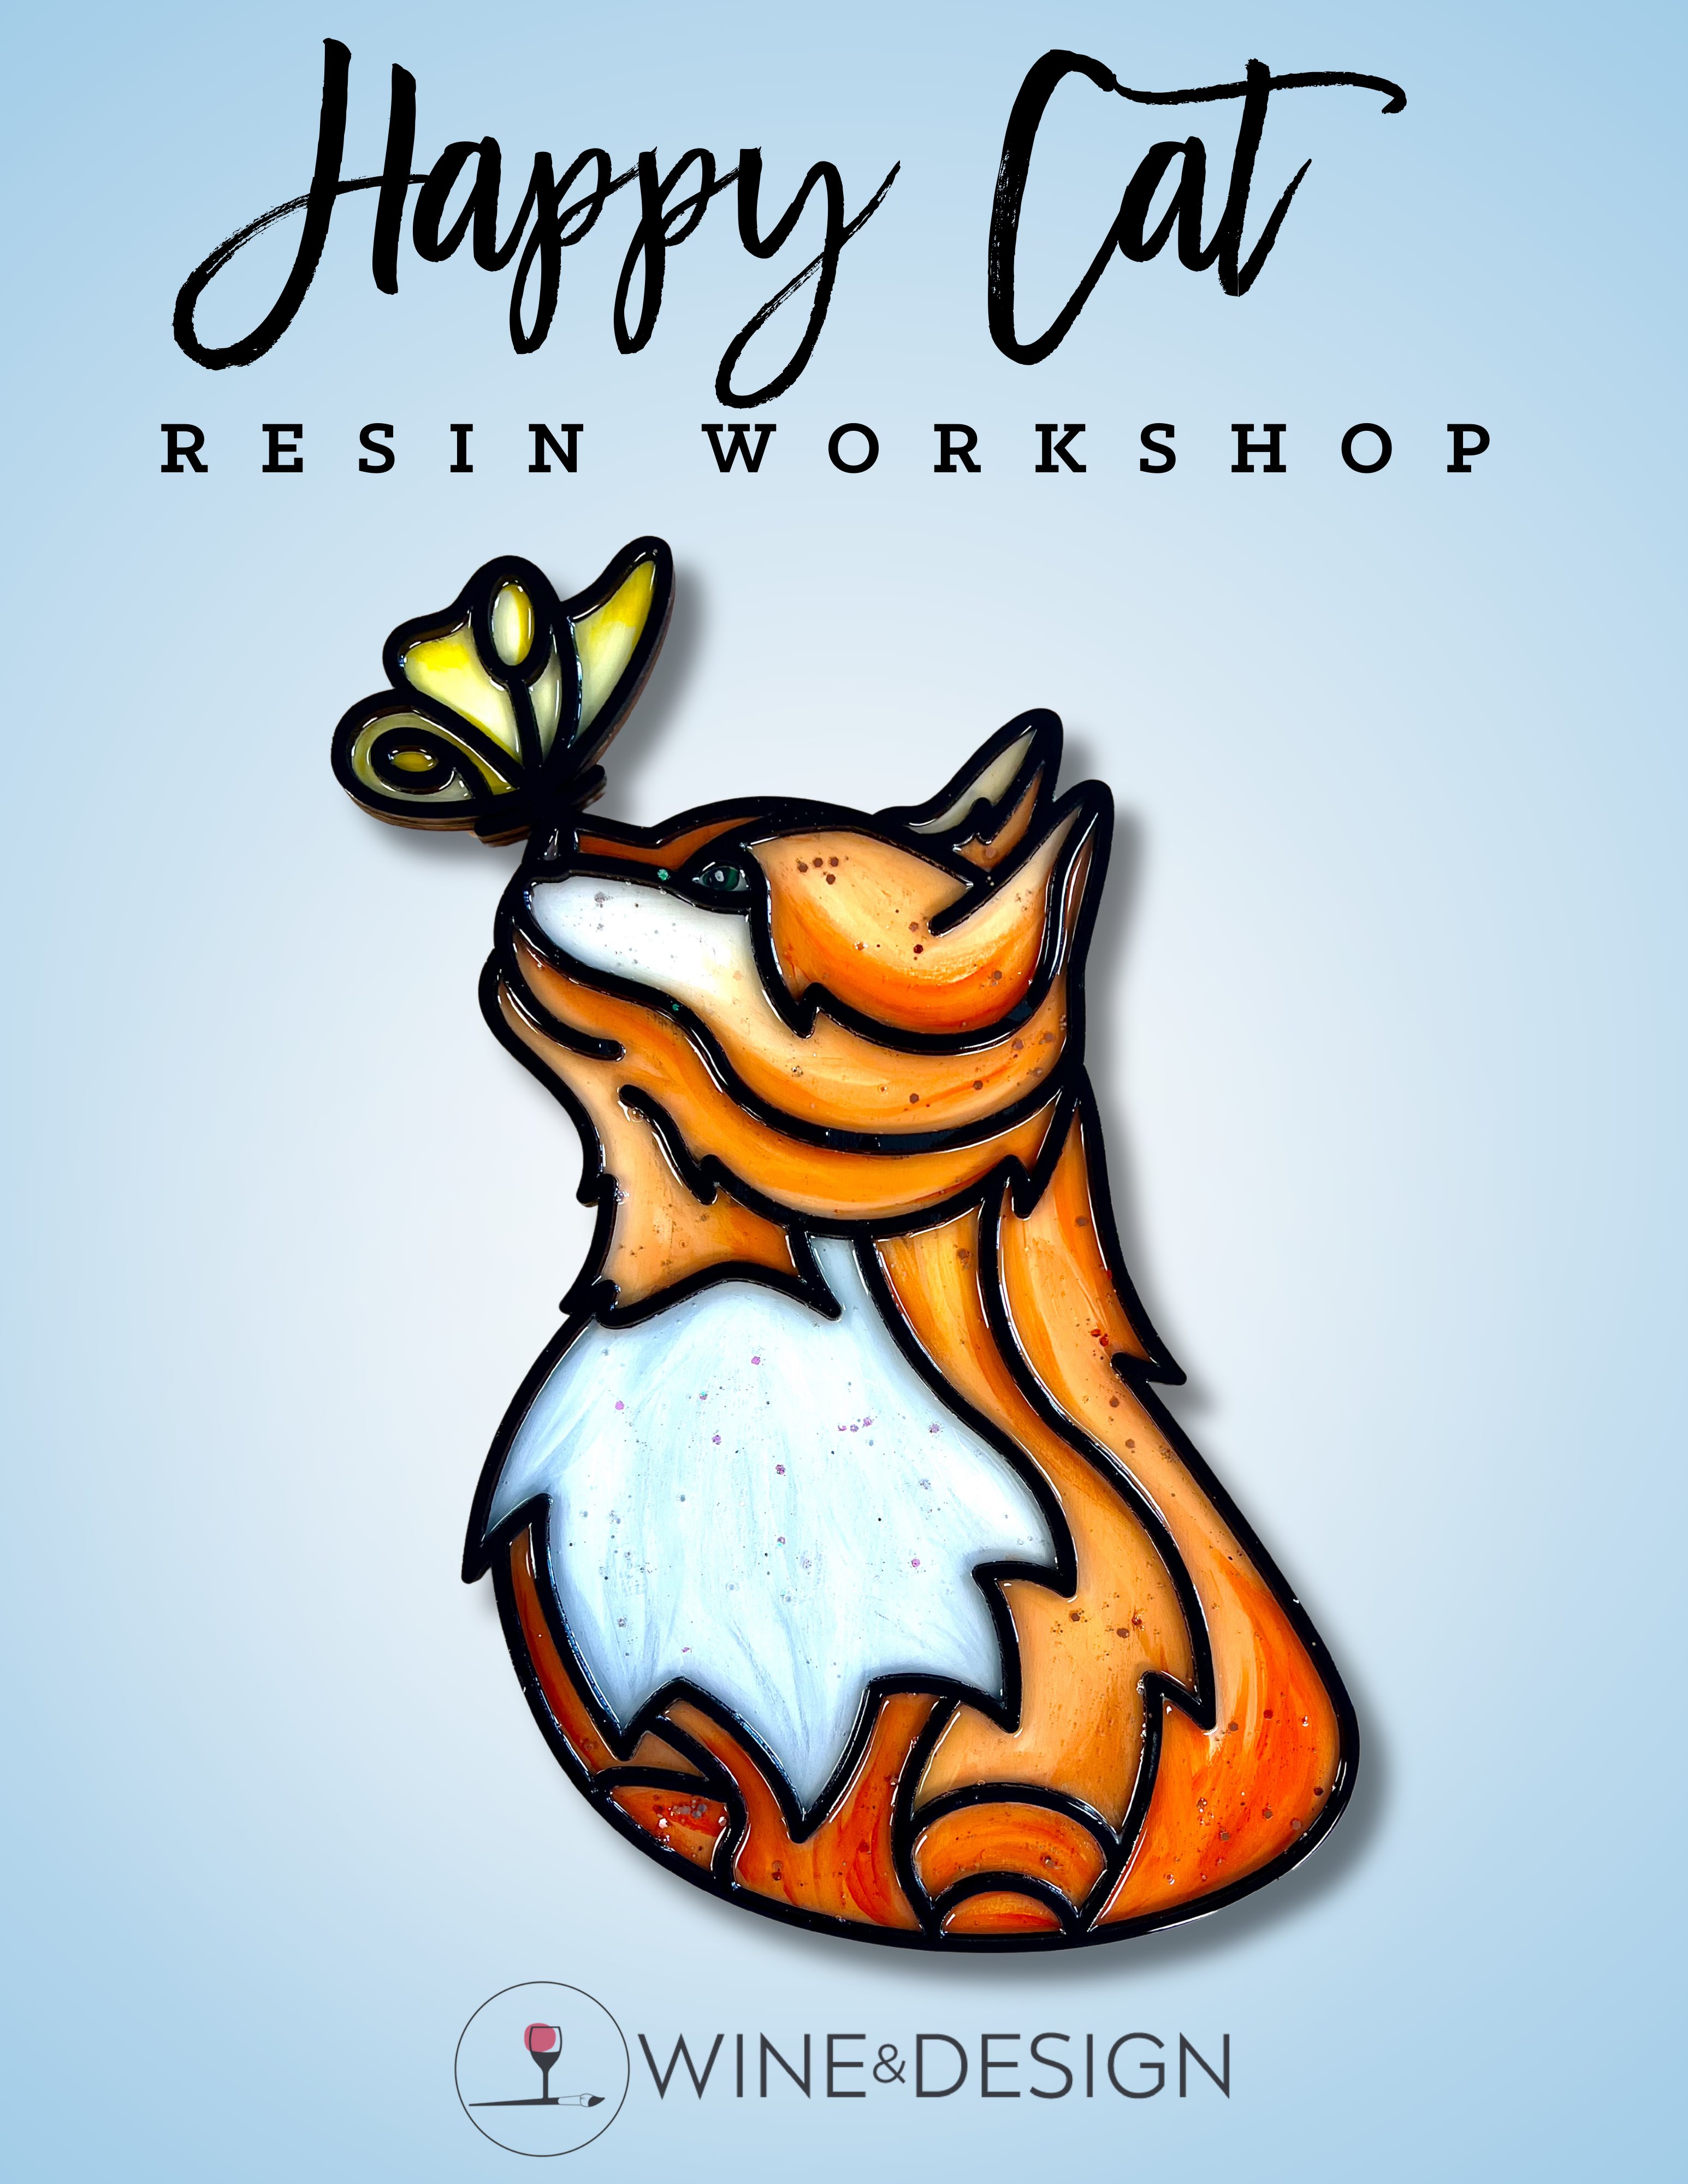 Happy Cat Resin Workshop | 3:00-5:00pm *MUST REGISTER BY MAY 26TH!